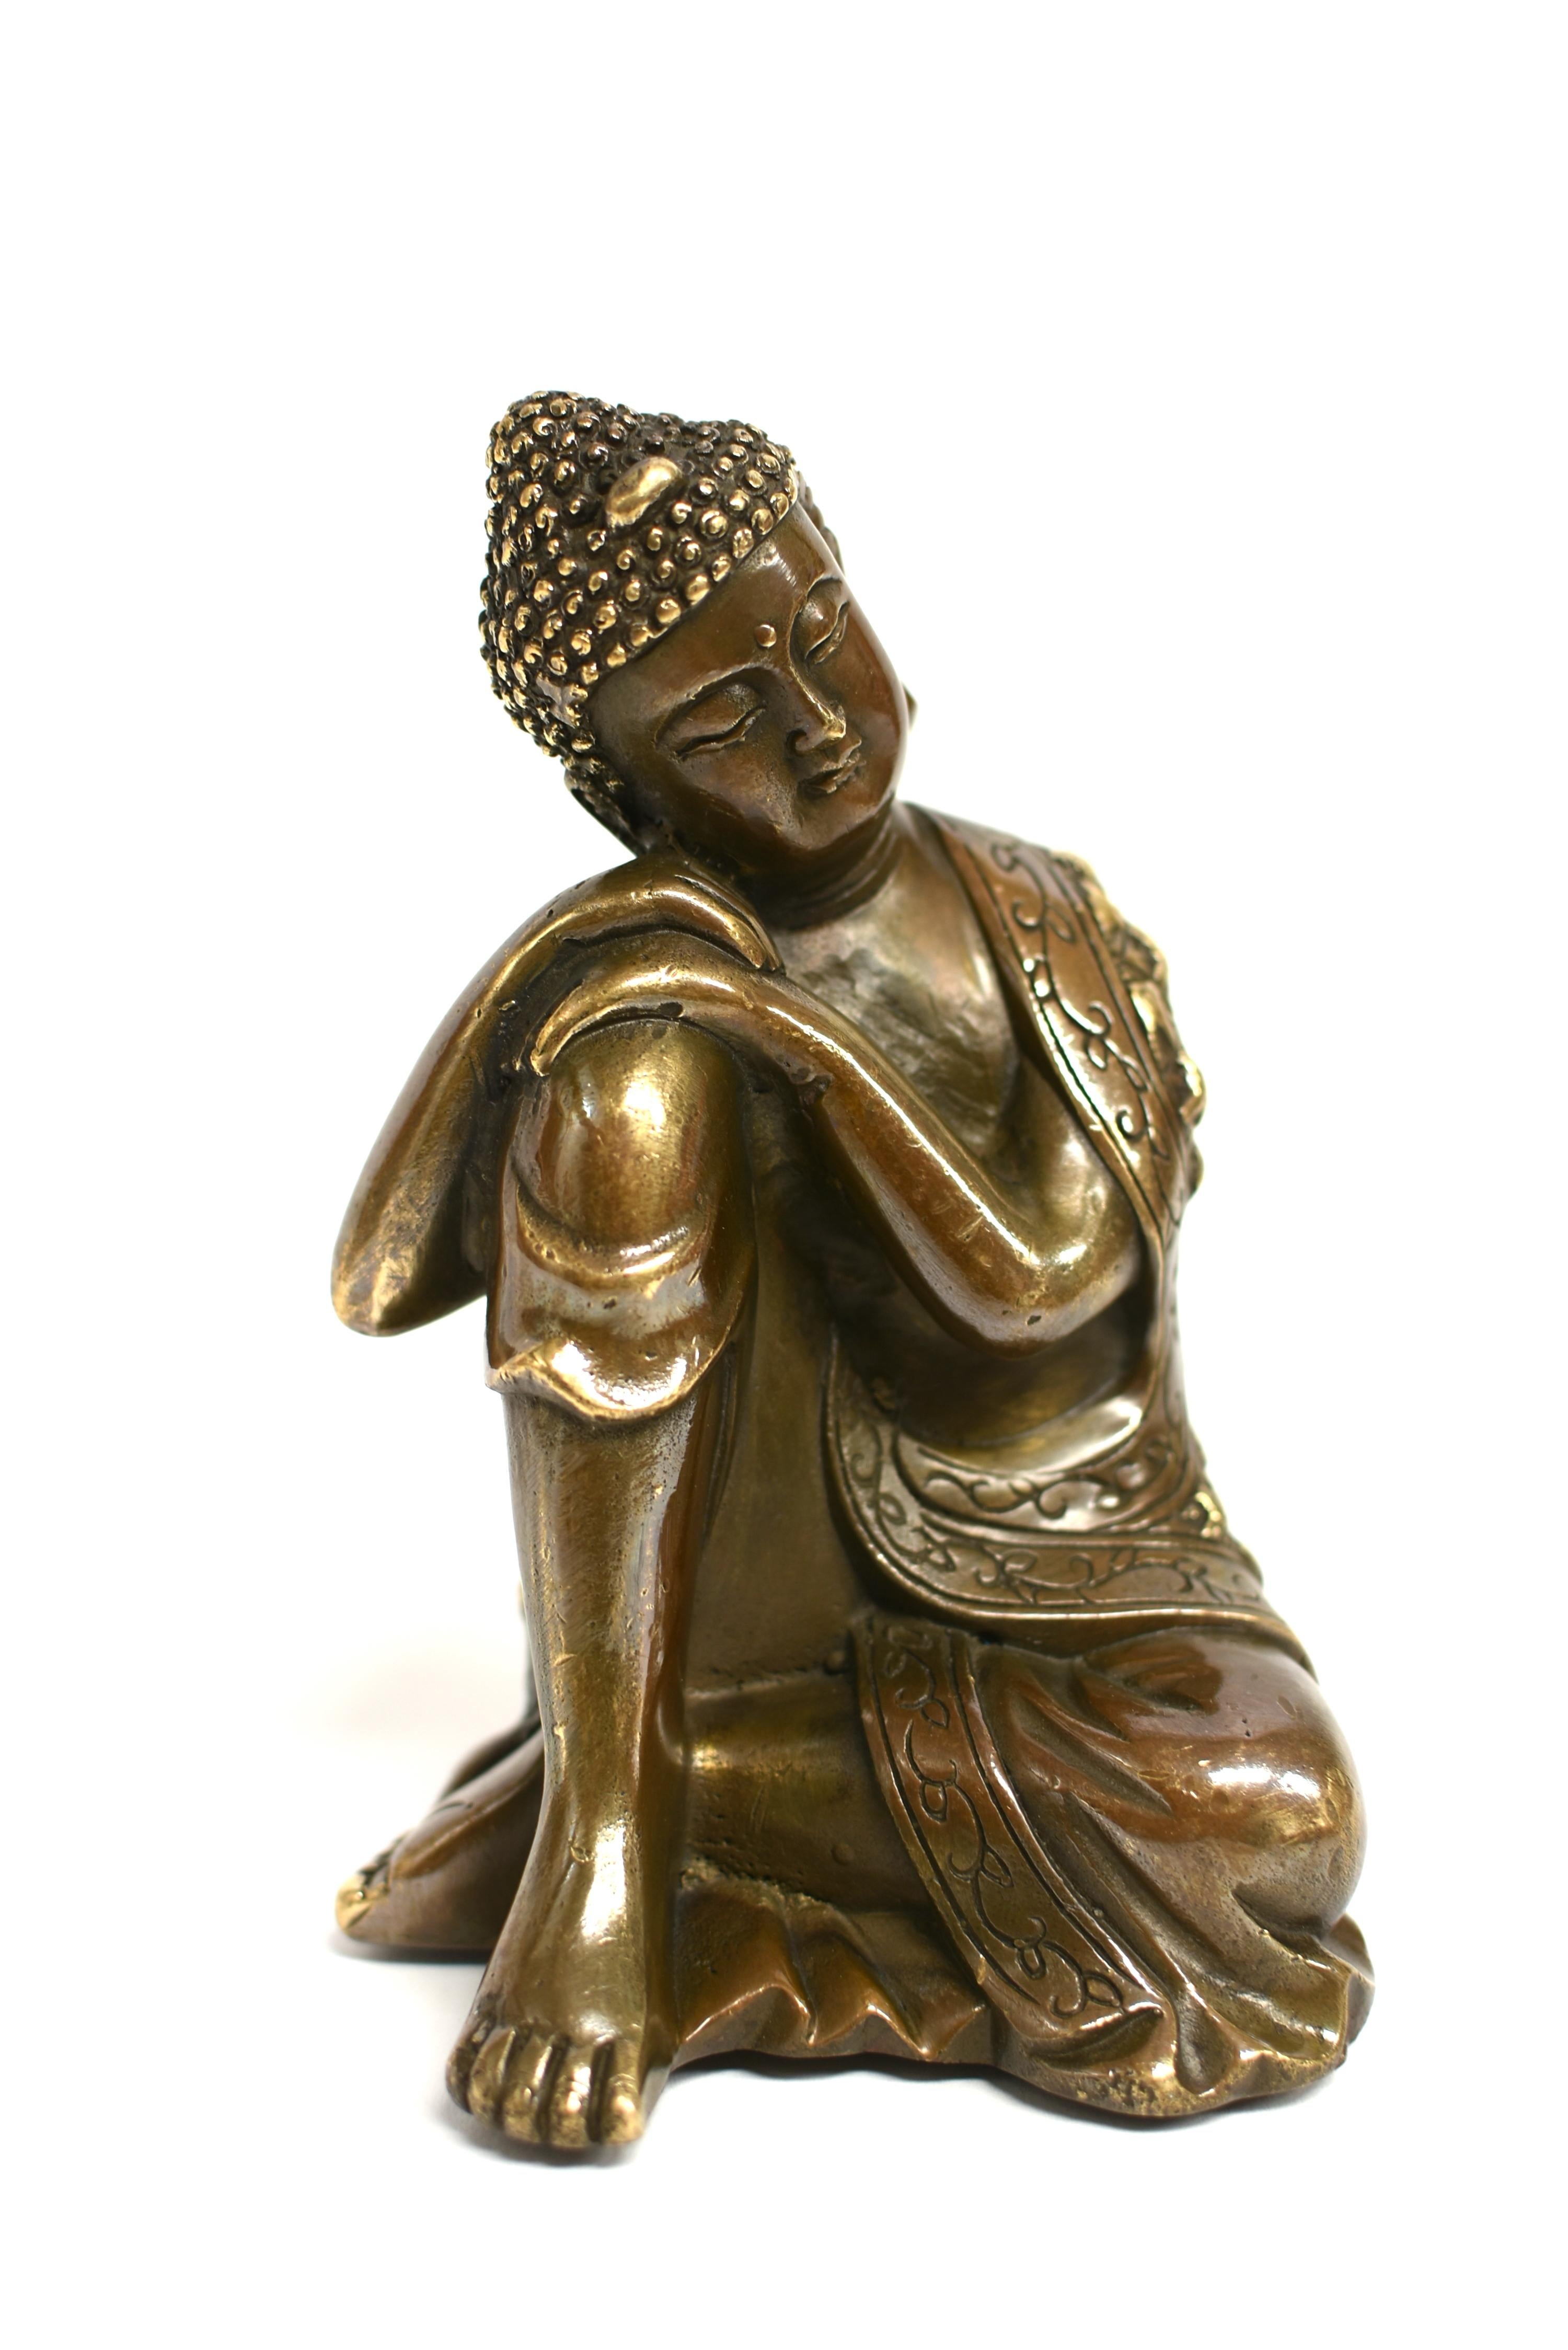 A fine bronze statue depicting Buddha in contemplative mode. The broad face with closed eyes casting a serene aura, framed by long-lobed ears, beneath coiled hair and surmounted by an ushnisha. Buddha wears a long robe falling in graceful folds